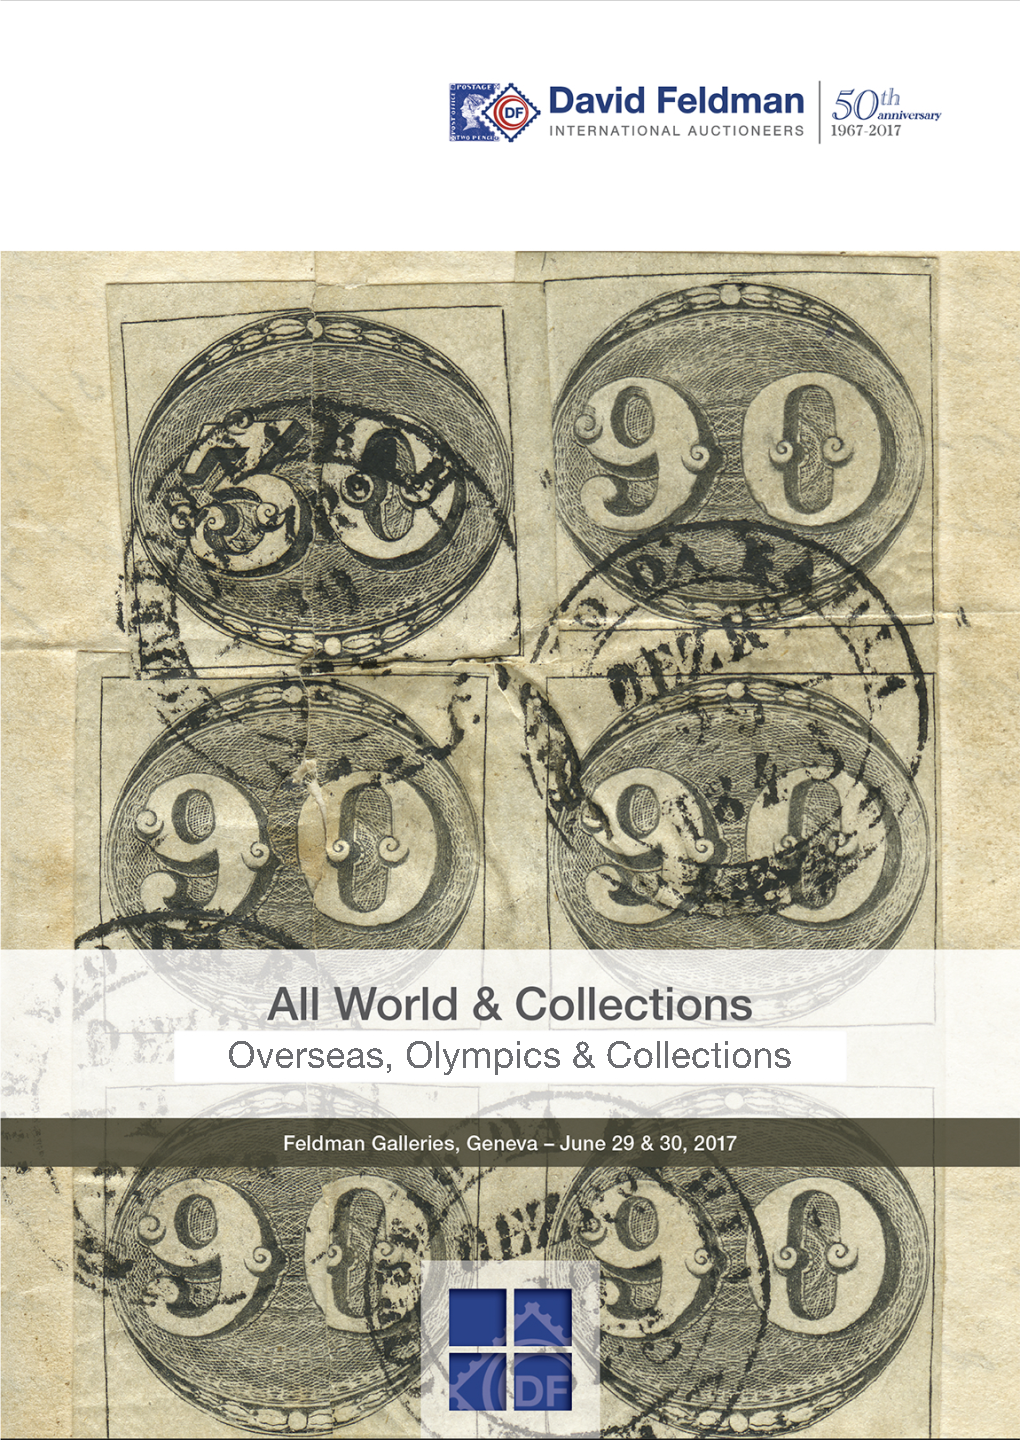 All World Stamp Auction Catalo